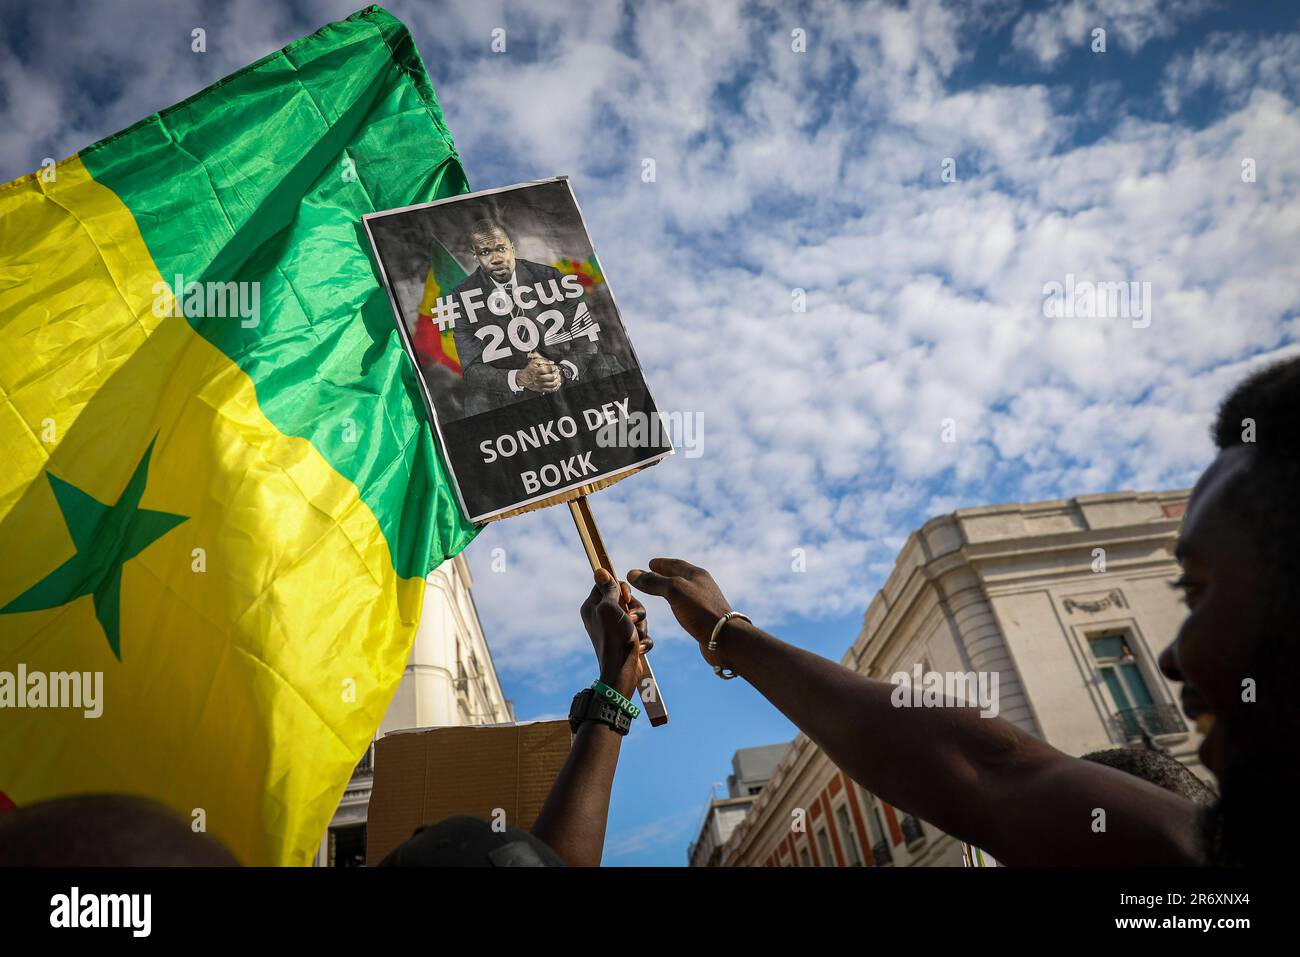 Madrid, Spain. 11th June, 2023. A protester holds a placard in support of  Senegalese opposition leader Ousmane Sonko during the demonstration.  Senegalese residing in Madrid gathered at Madrid's Puerta del Sol to